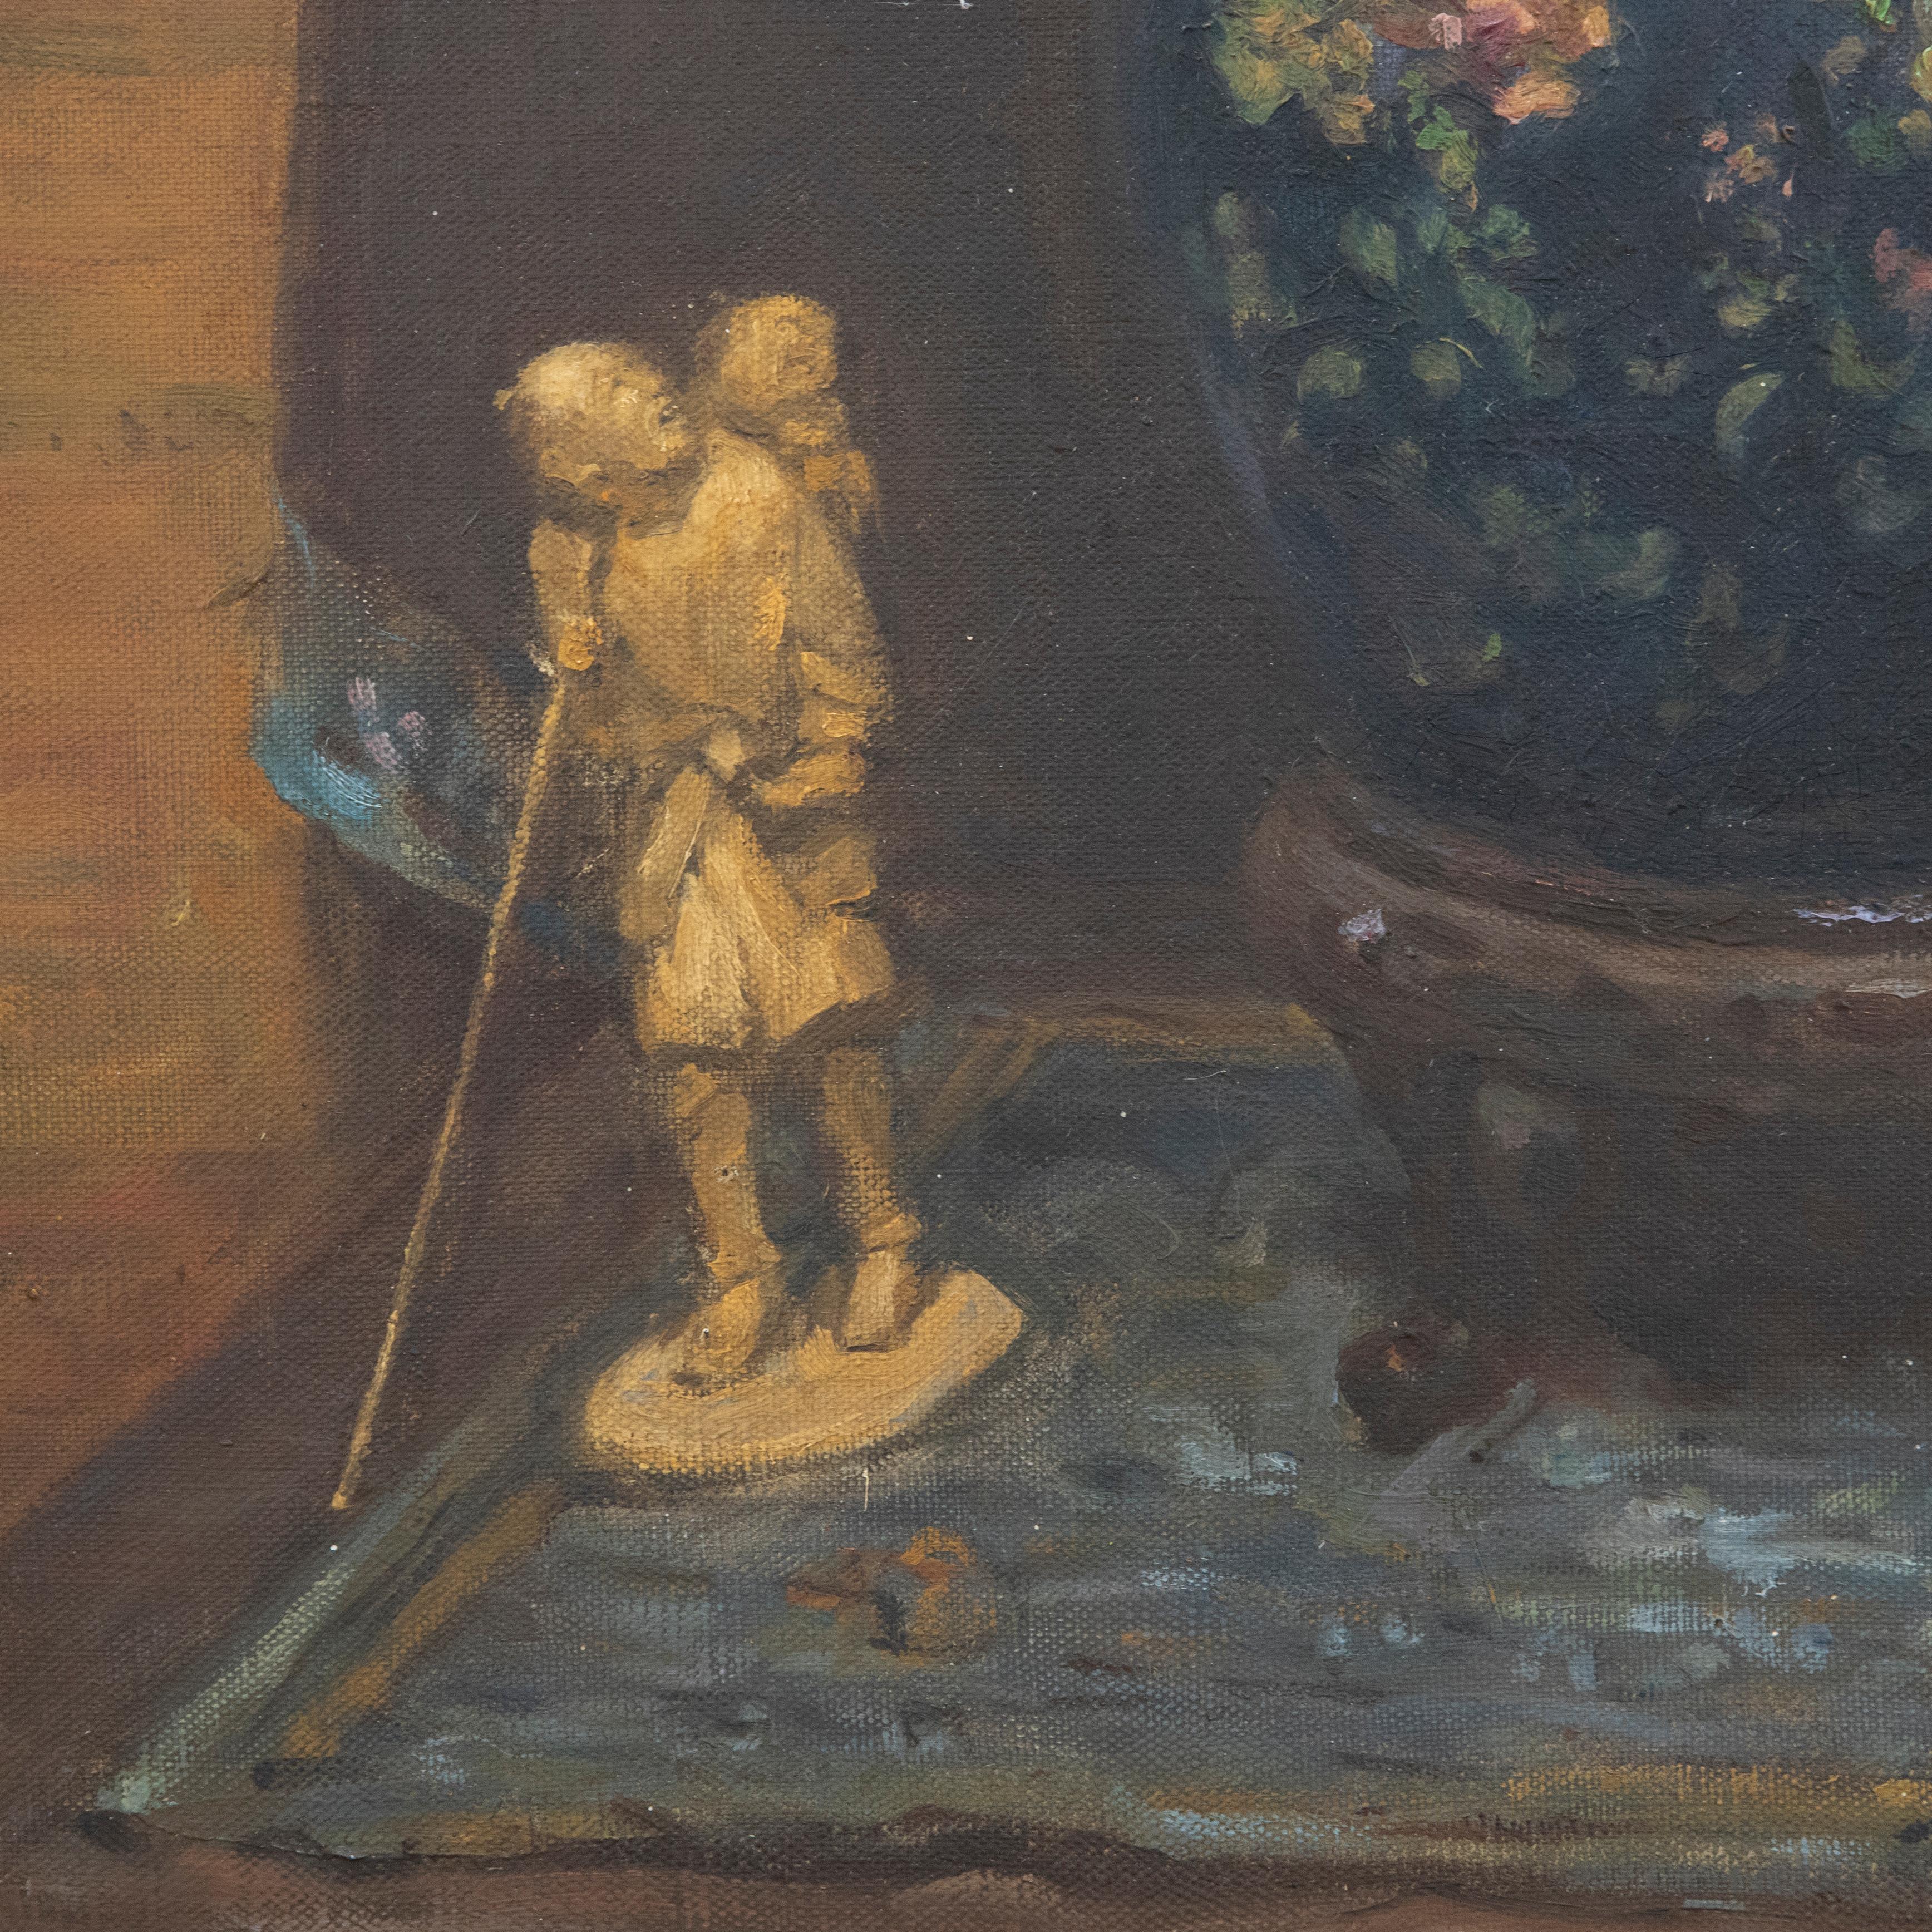 A delicate oil painting by the artist Jean Ballantyne, depicting a still life scene with Chinese ginger jar and ivory figurine. Beautifully presented in a gilt-effect frame with bead course to the outer edge and shell running pattern to the inner